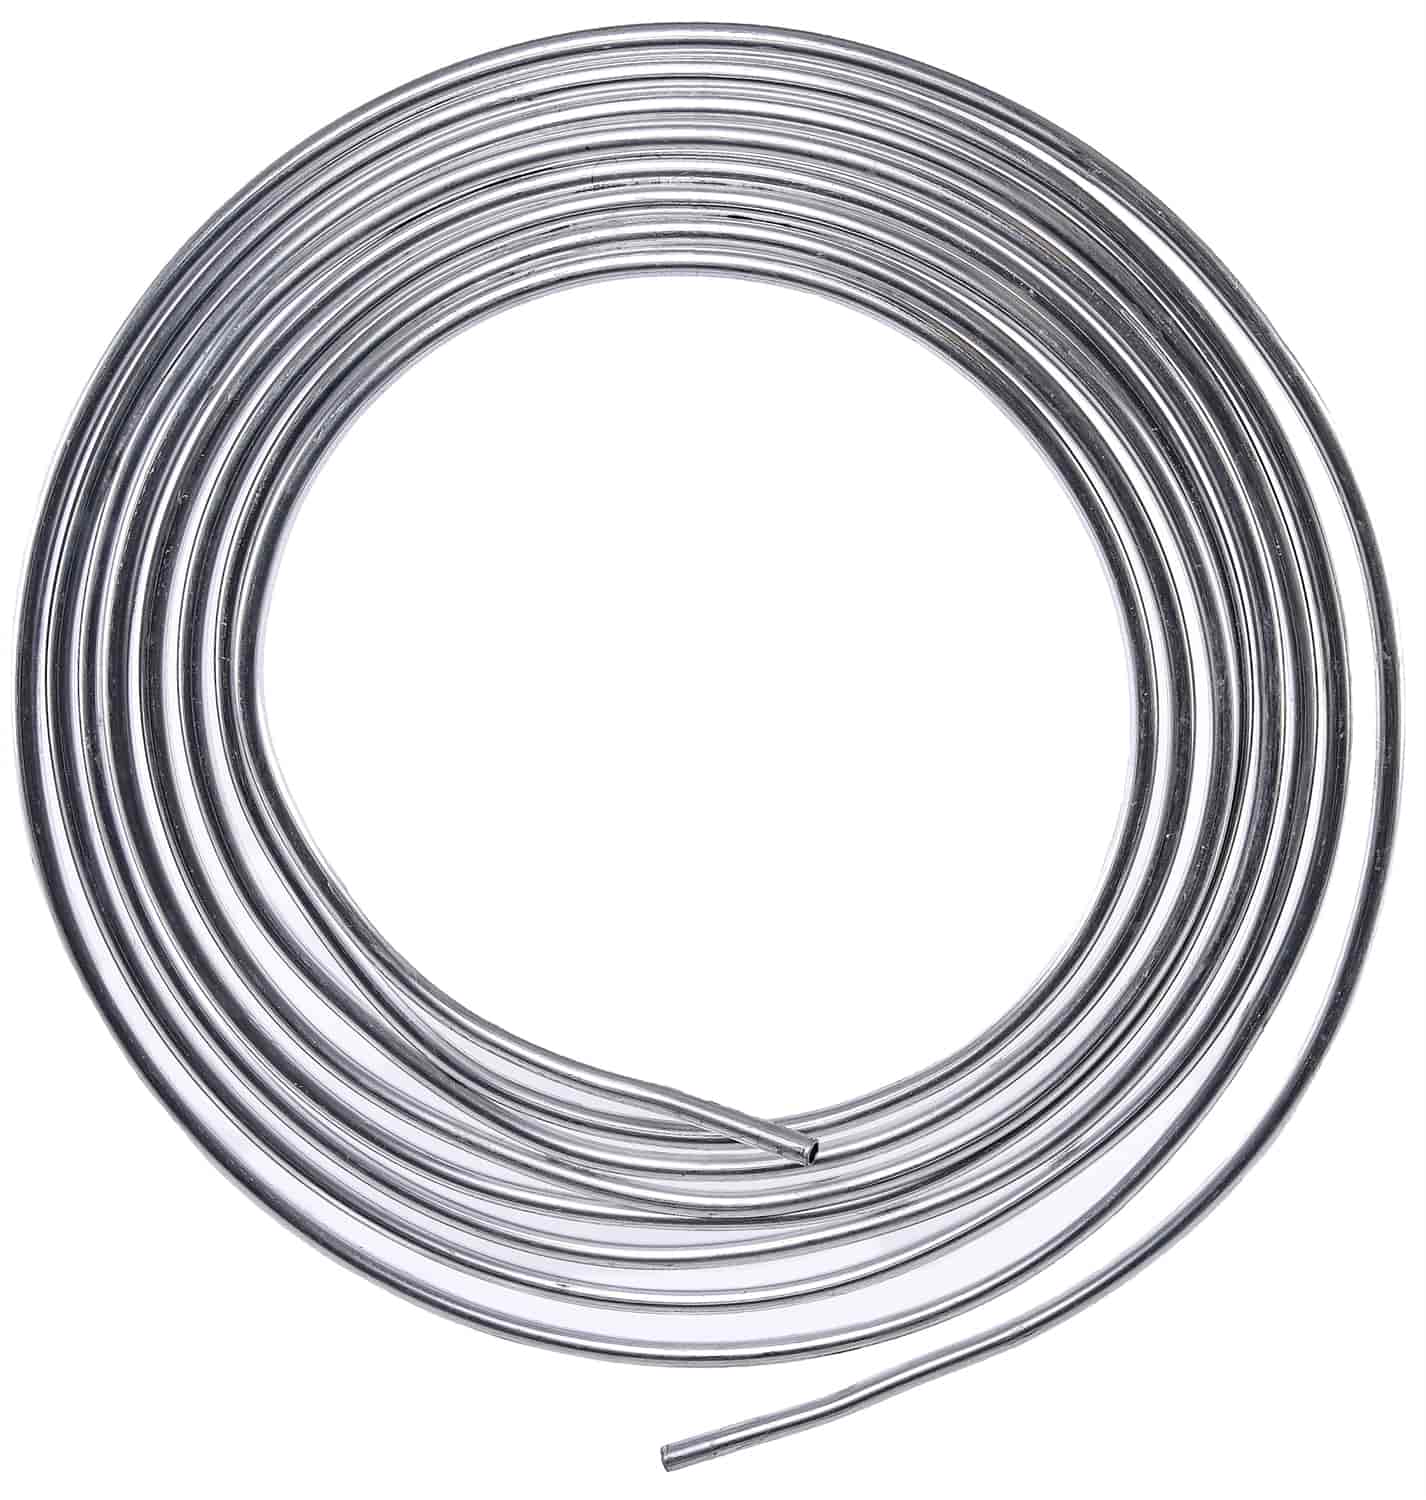 Aluminum Fuel Line [5/16 in. OD x 0.035 in. Wall]